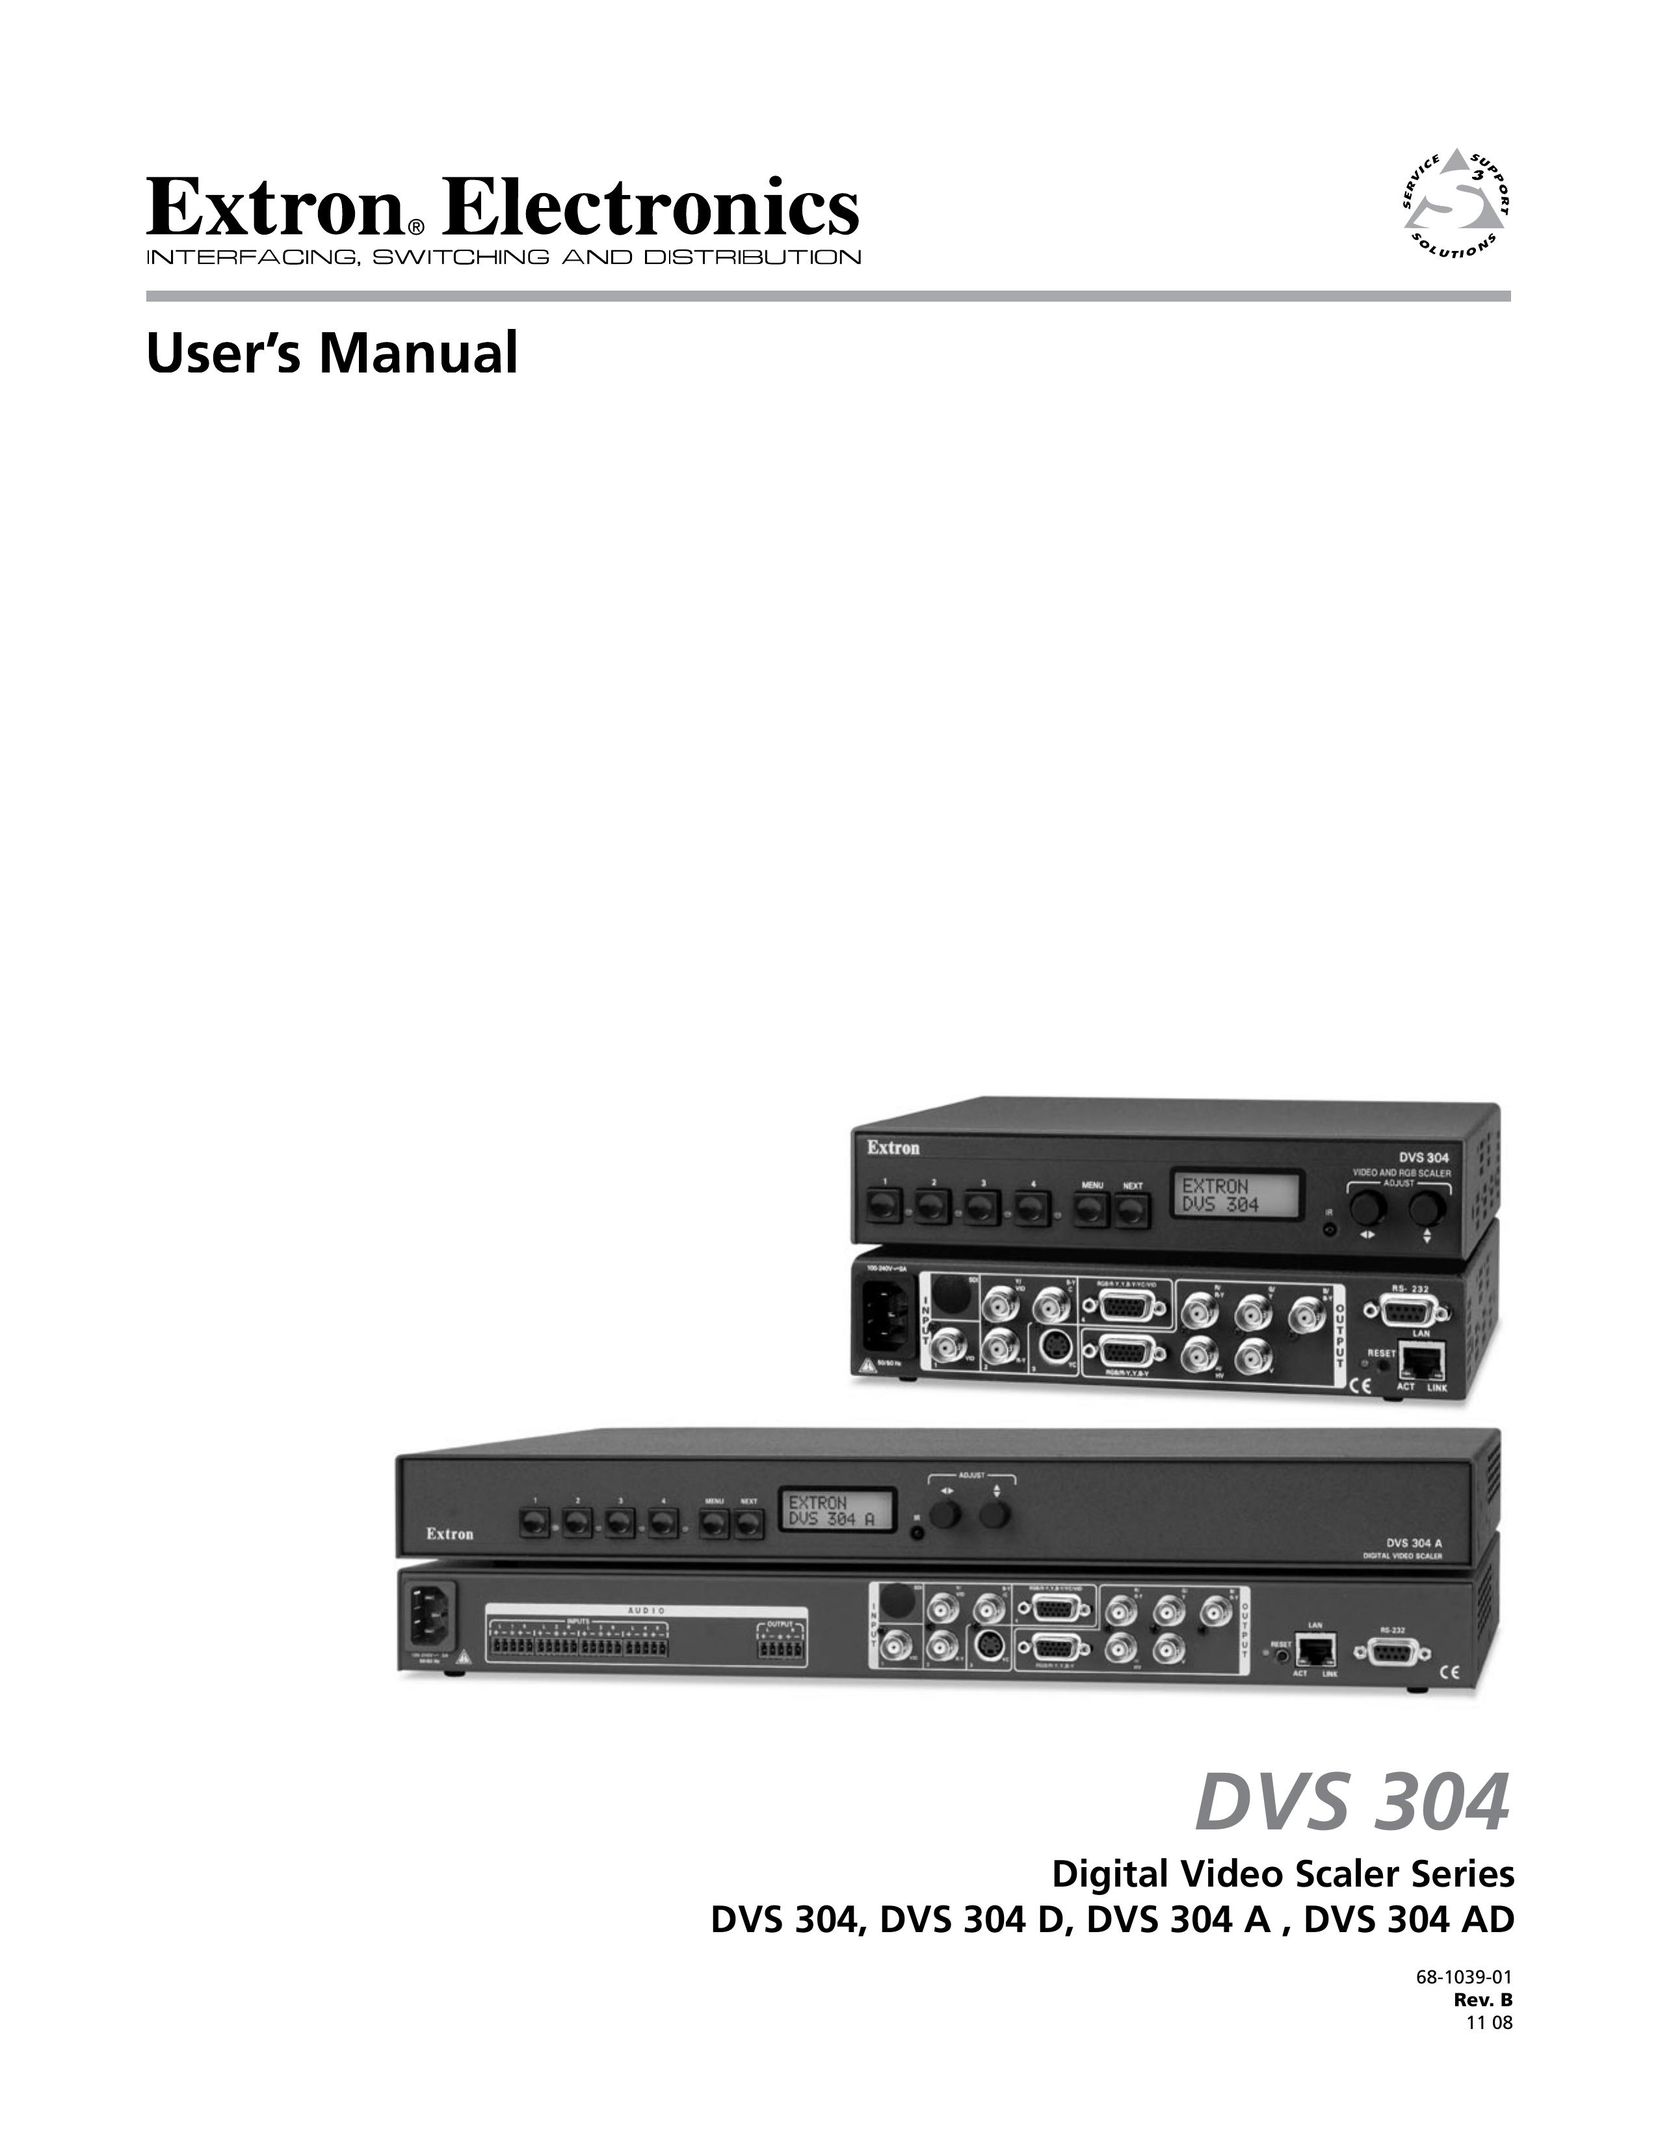 Extron electronic DVS 304 AD Stereo Receiver User Manual